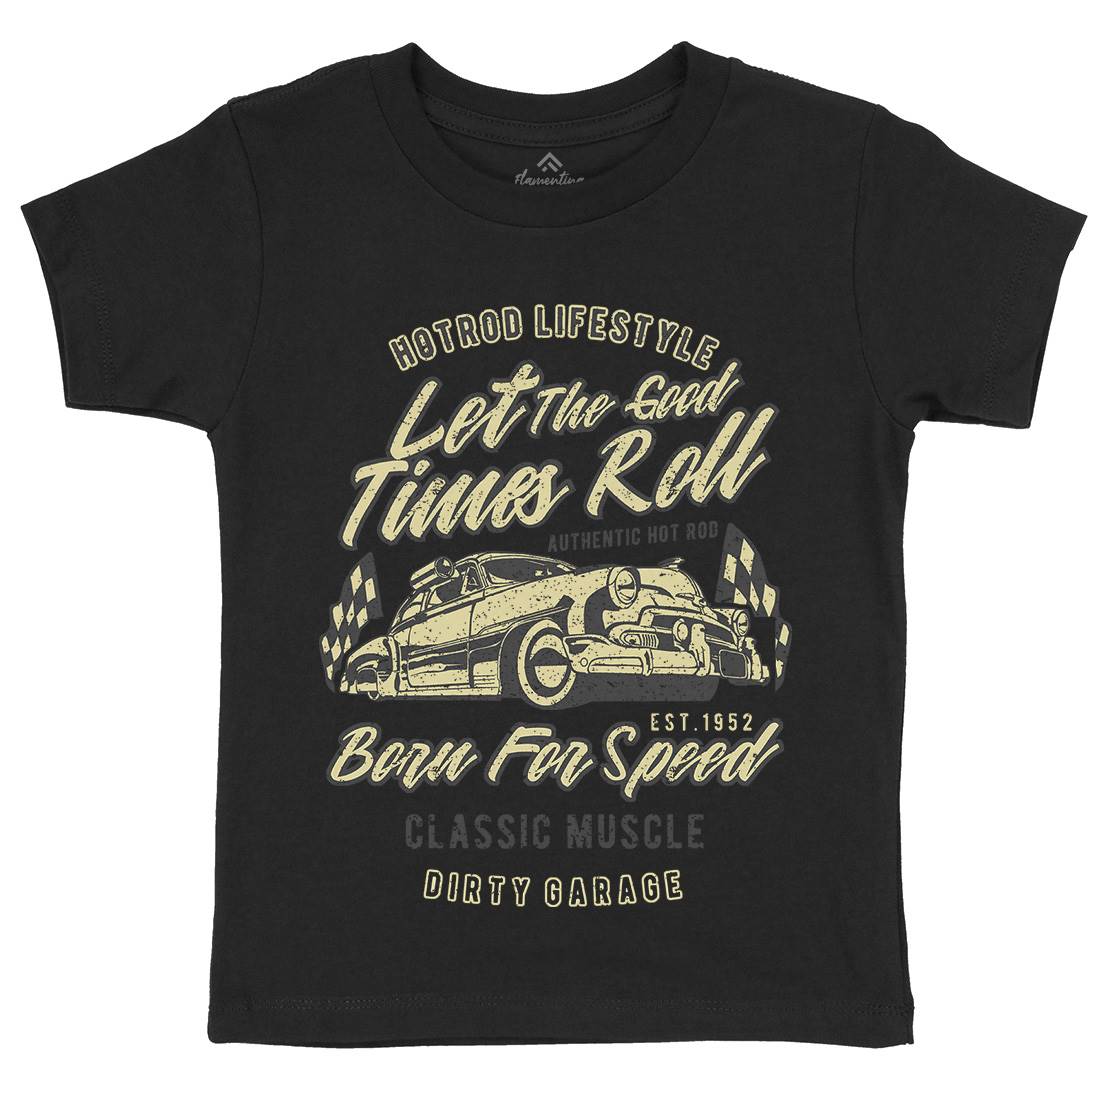 Let The Good Times Roll Kids Organic Crew Neck T-Shirt Cars A705